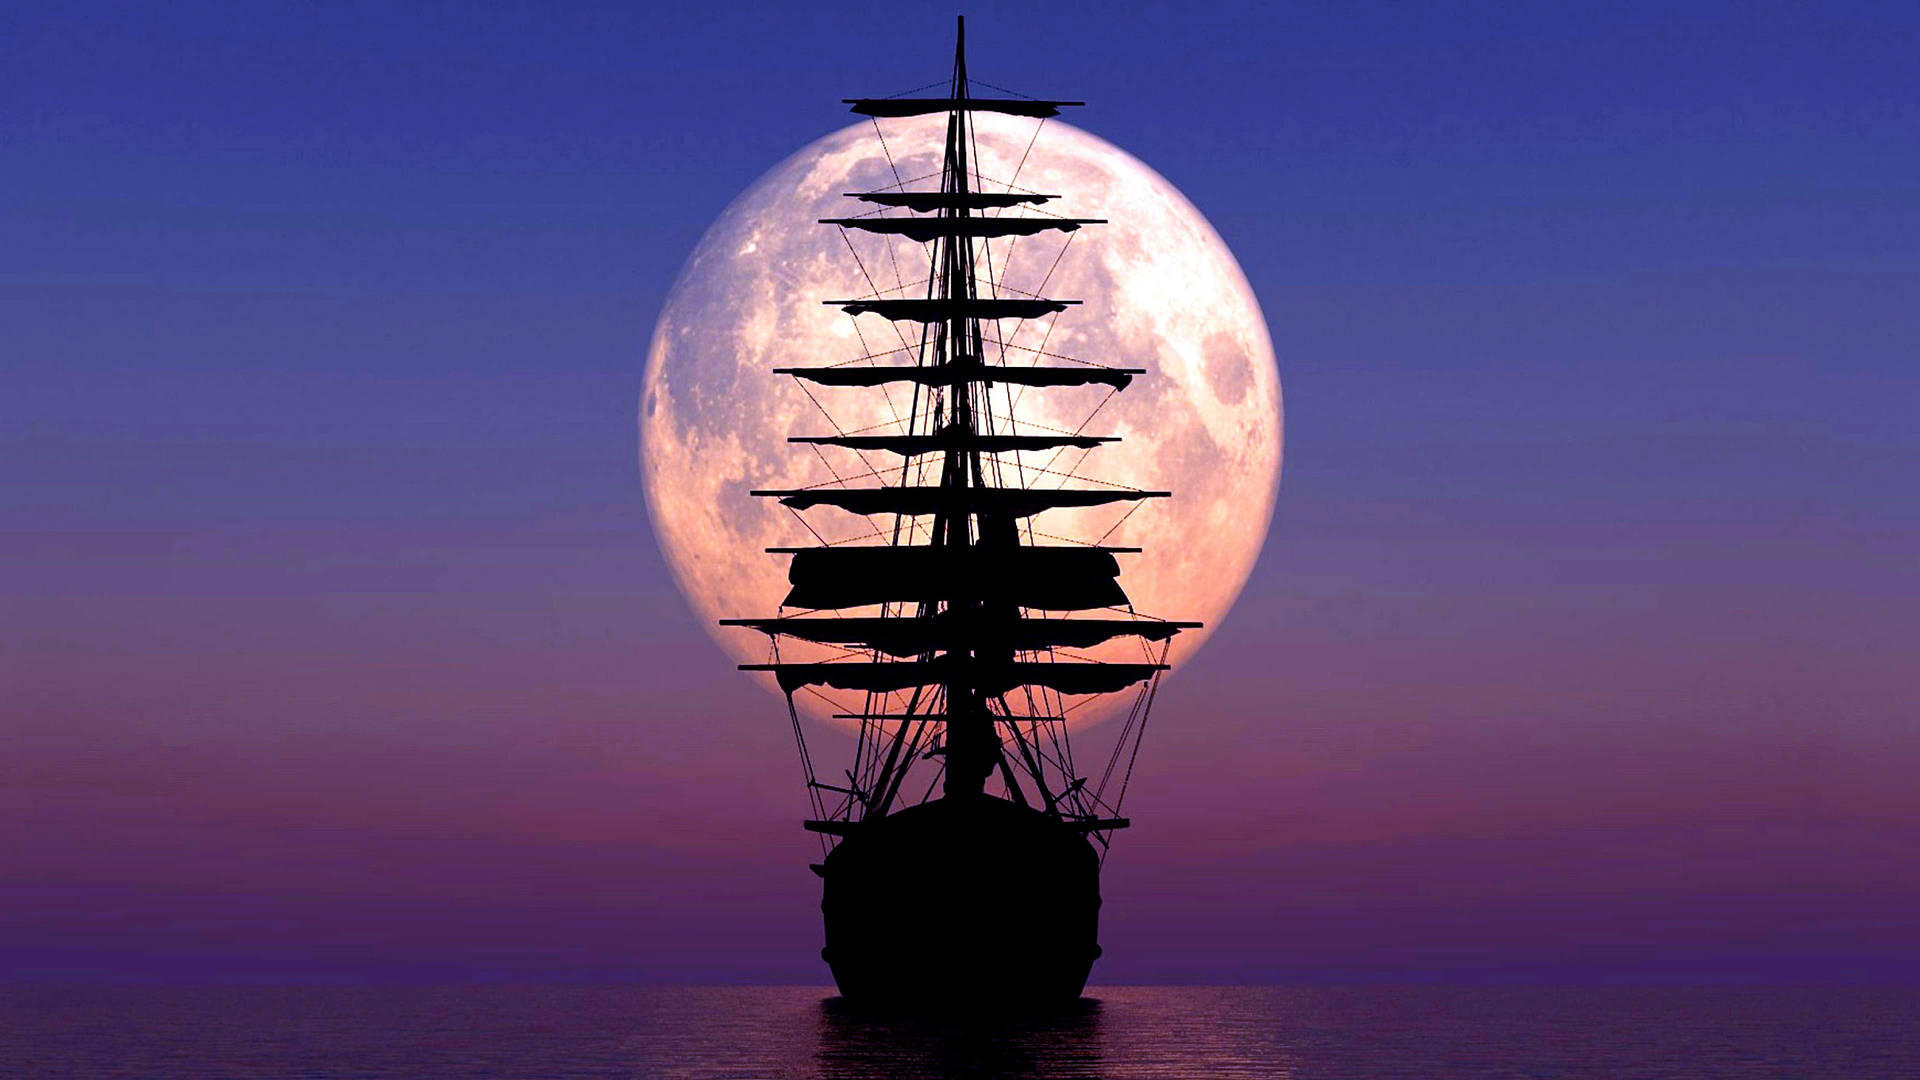 Sailing Ship Silhouette Background